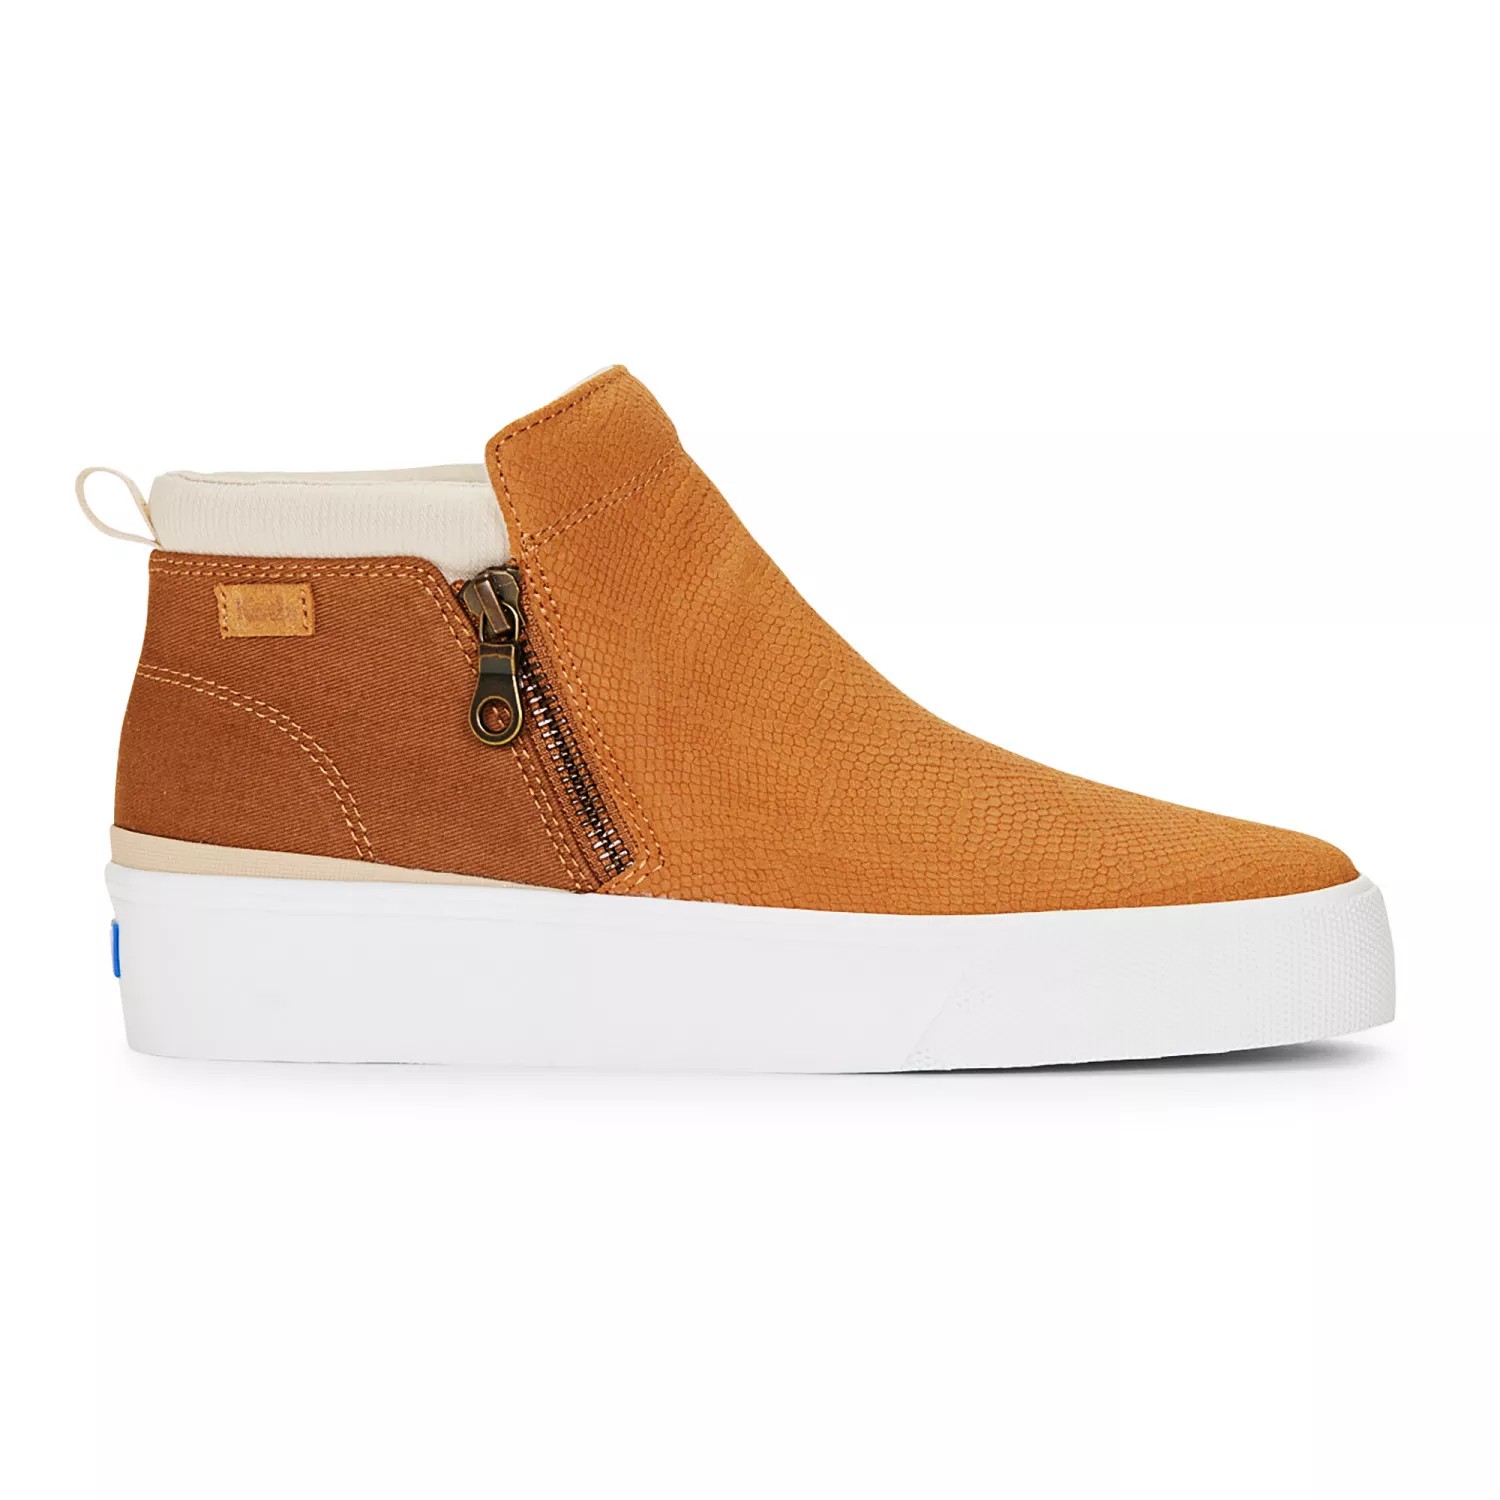 Keds Cooper Zip Snake Embossed Suede Bootie - Free Shipping | KEDS